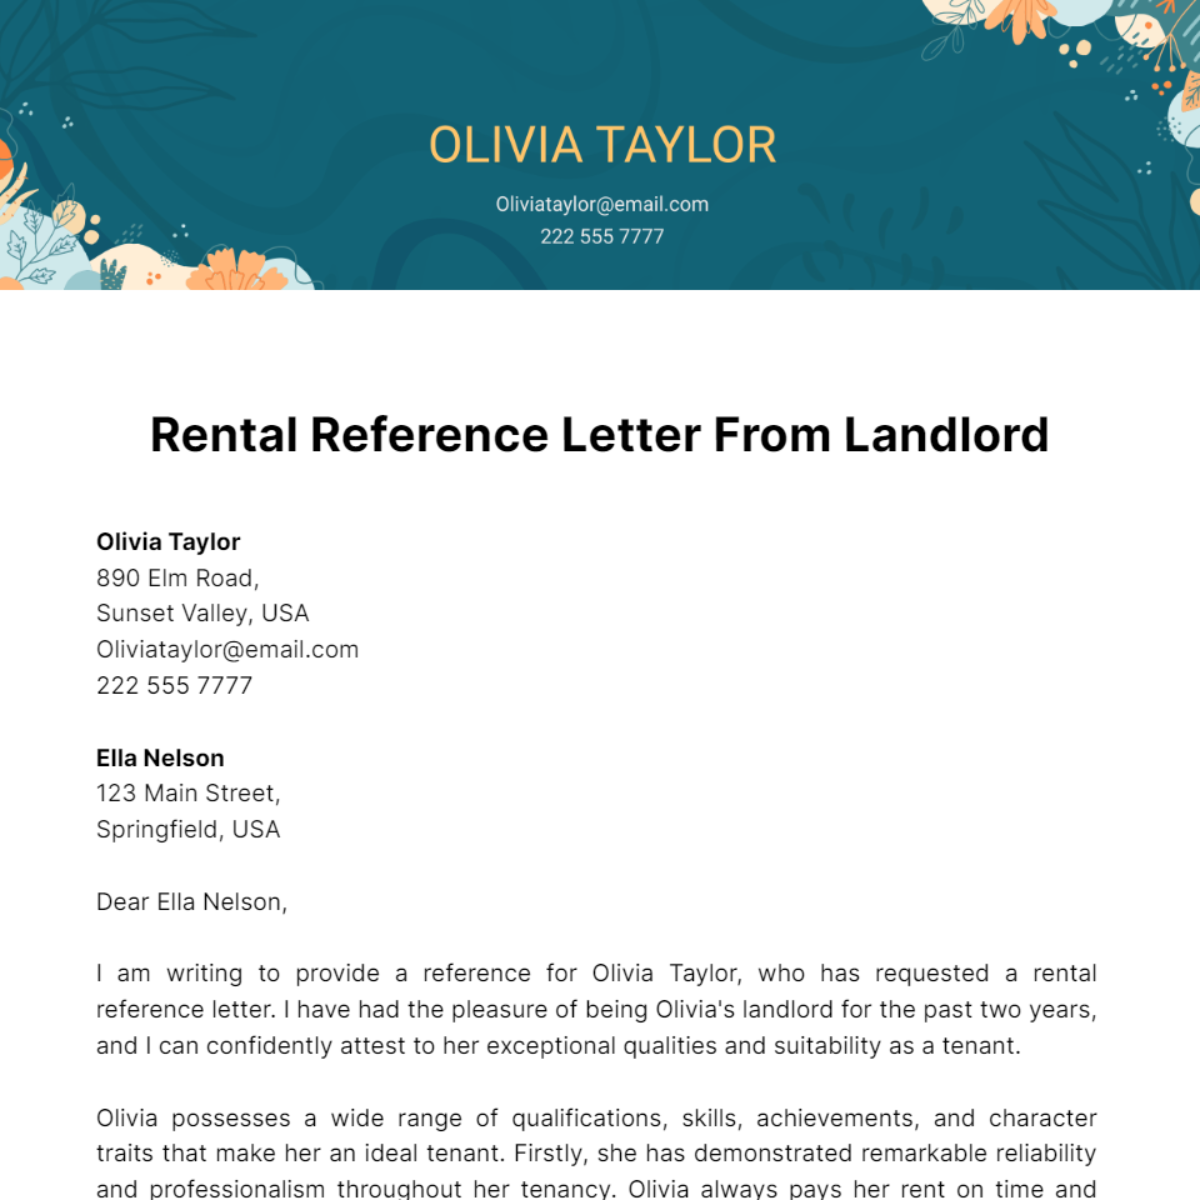 Rental Reference Letter From Landlord Template